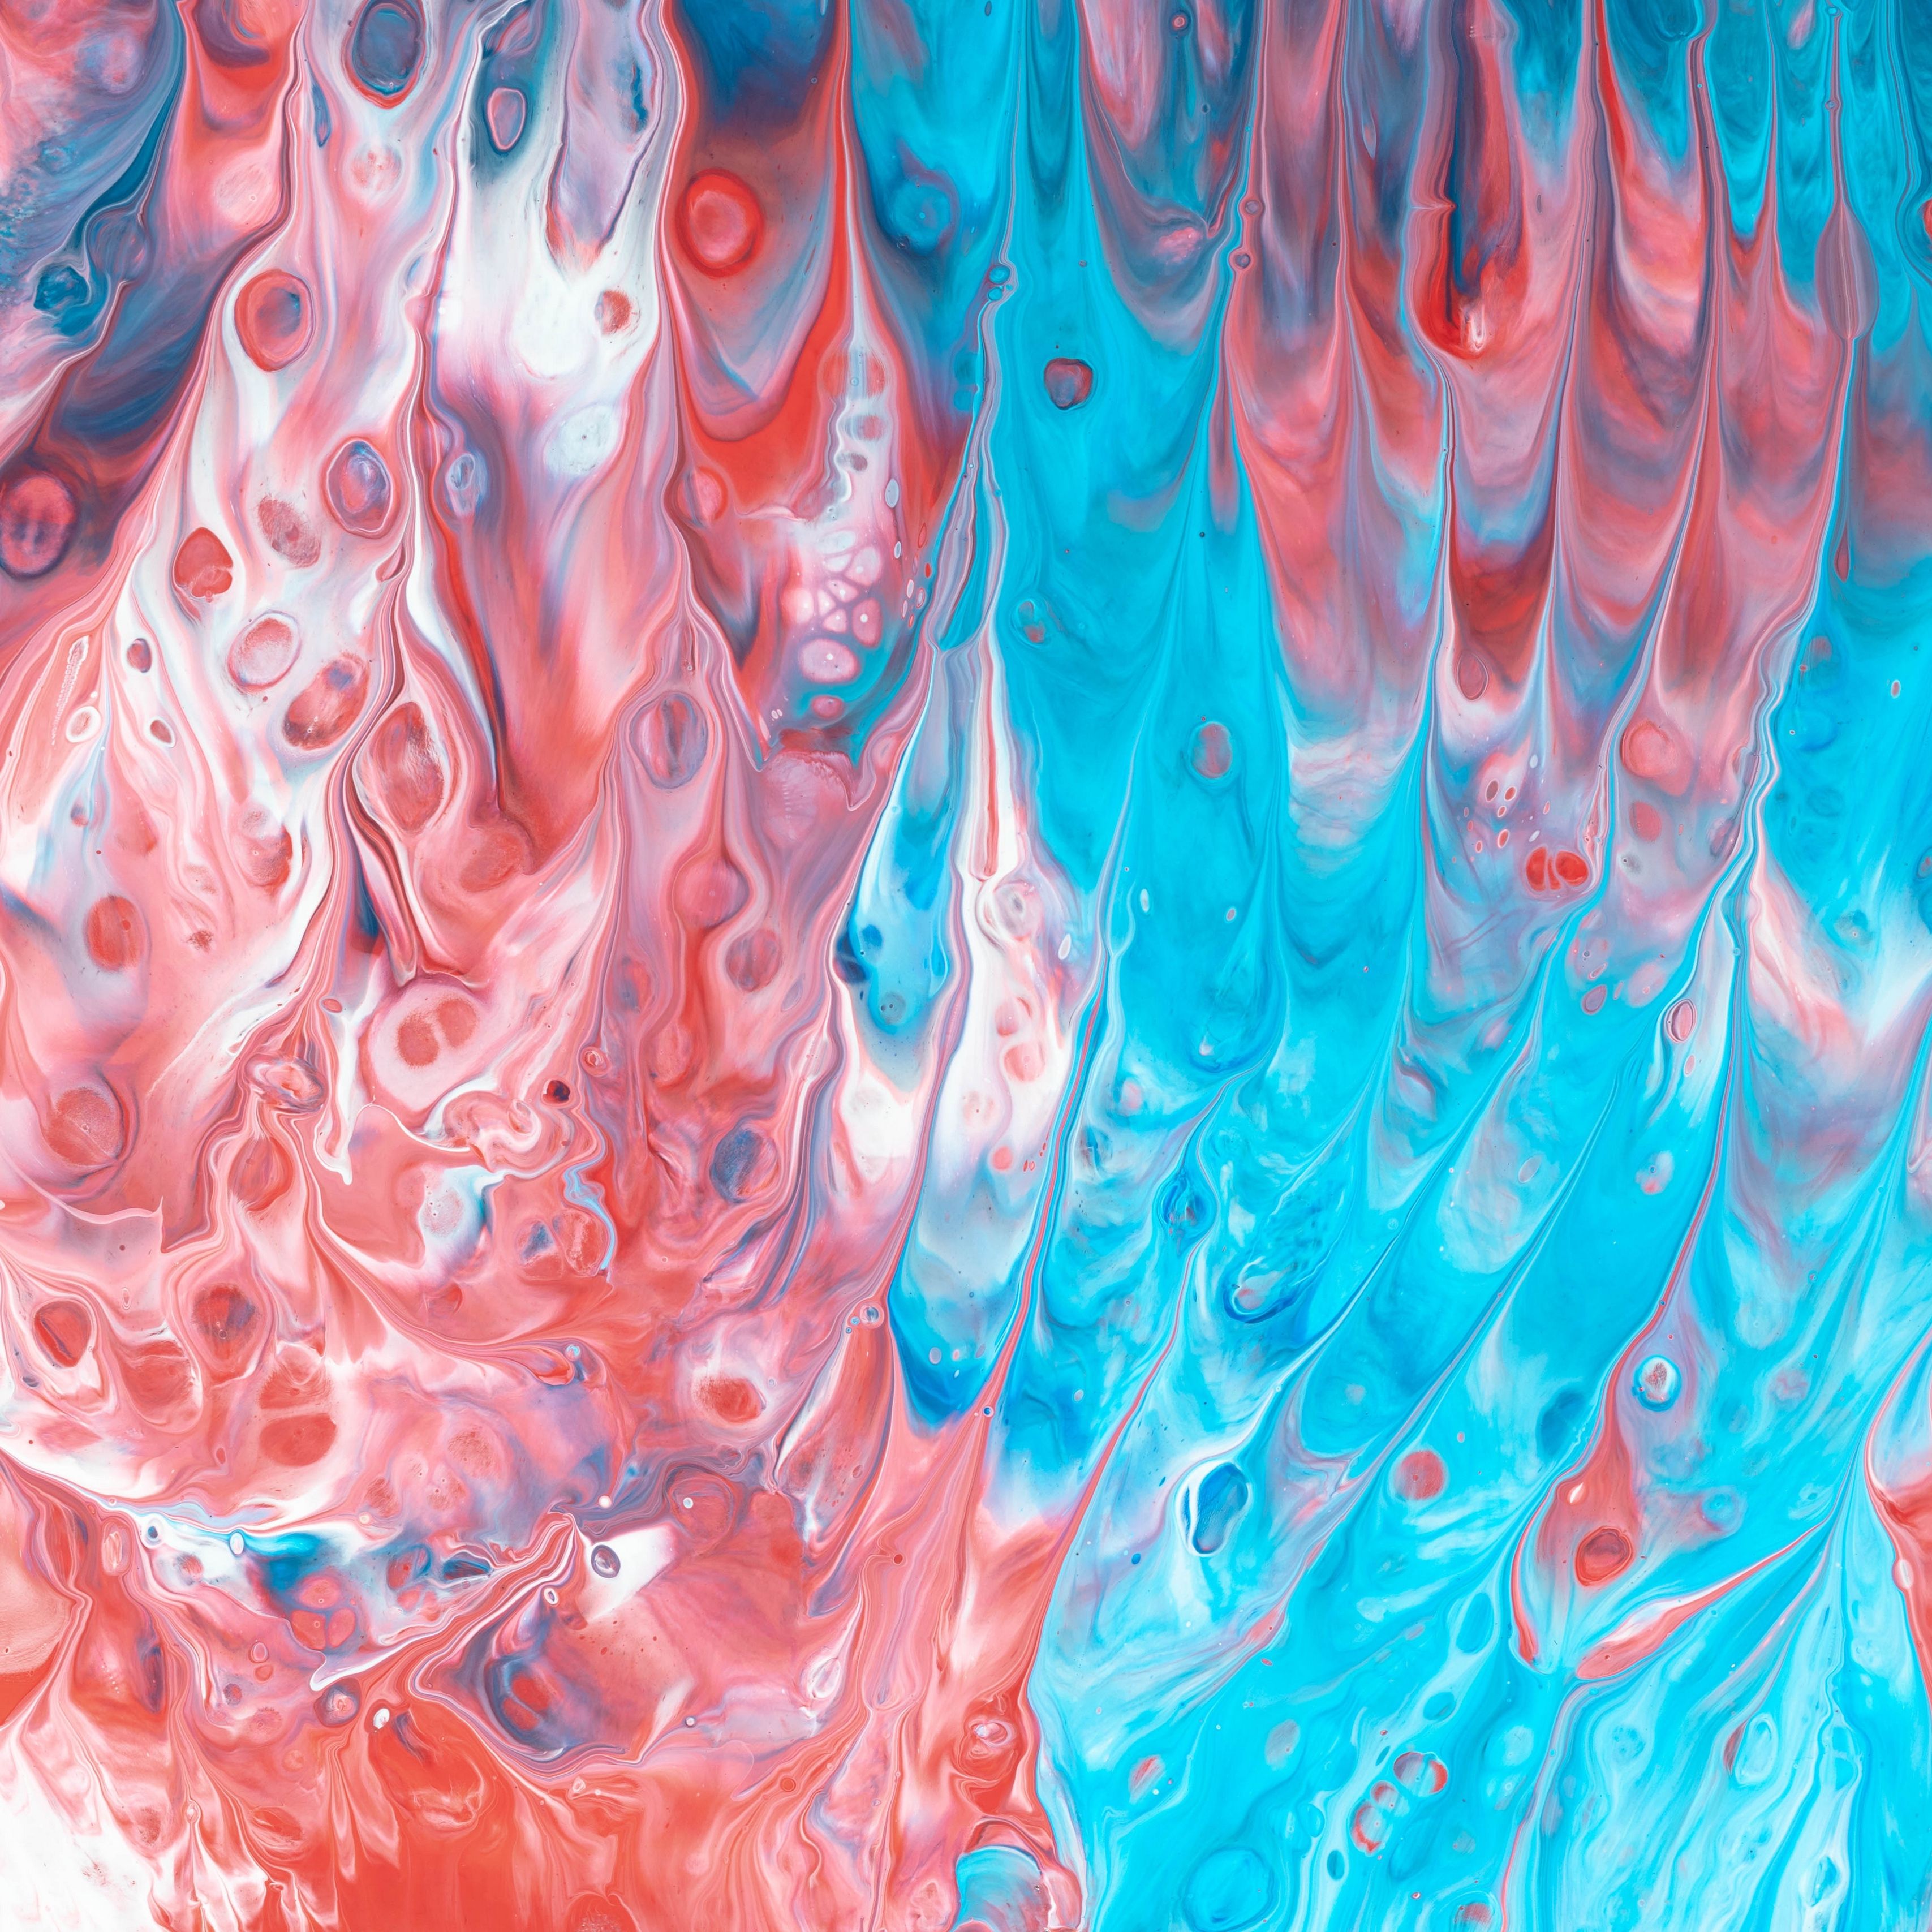 Download wallpapers 3415x3415 paint, drips, blue, red, bumps ipad